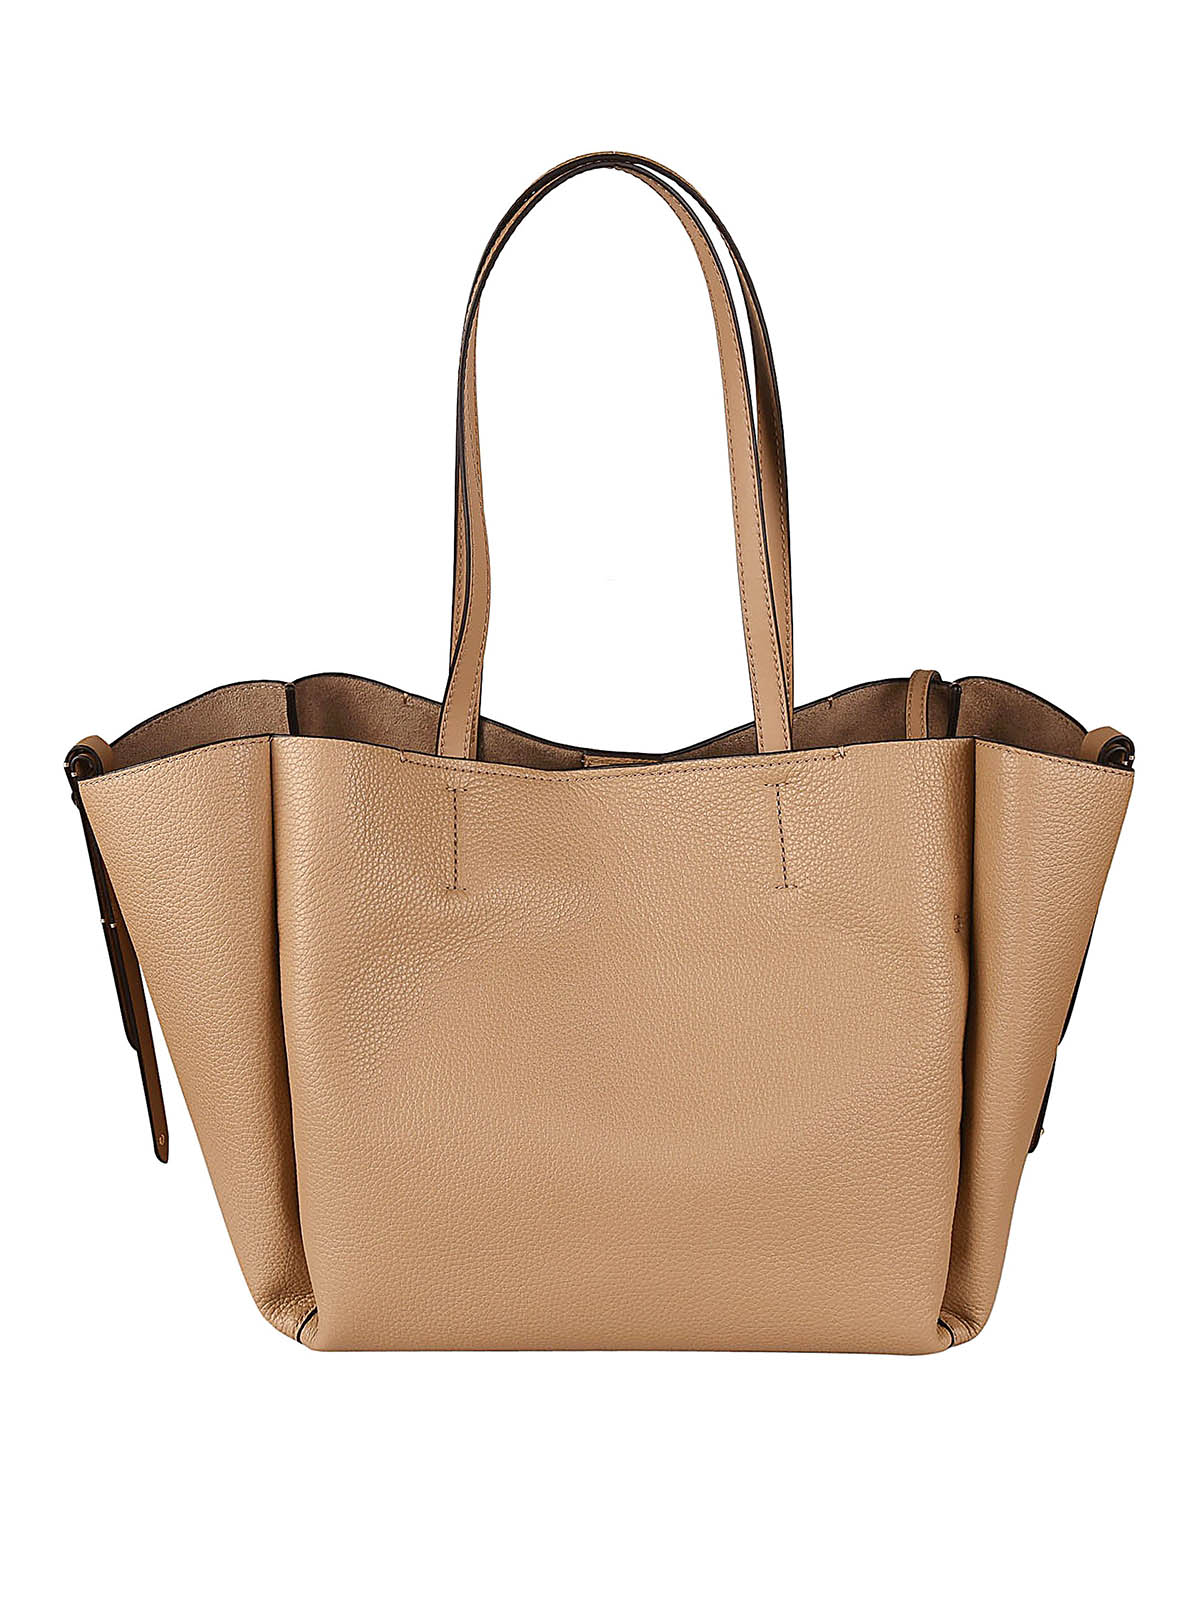 MICHAEL KORS TOTE BAG IN HAMMERED LEATHER Woman Camel